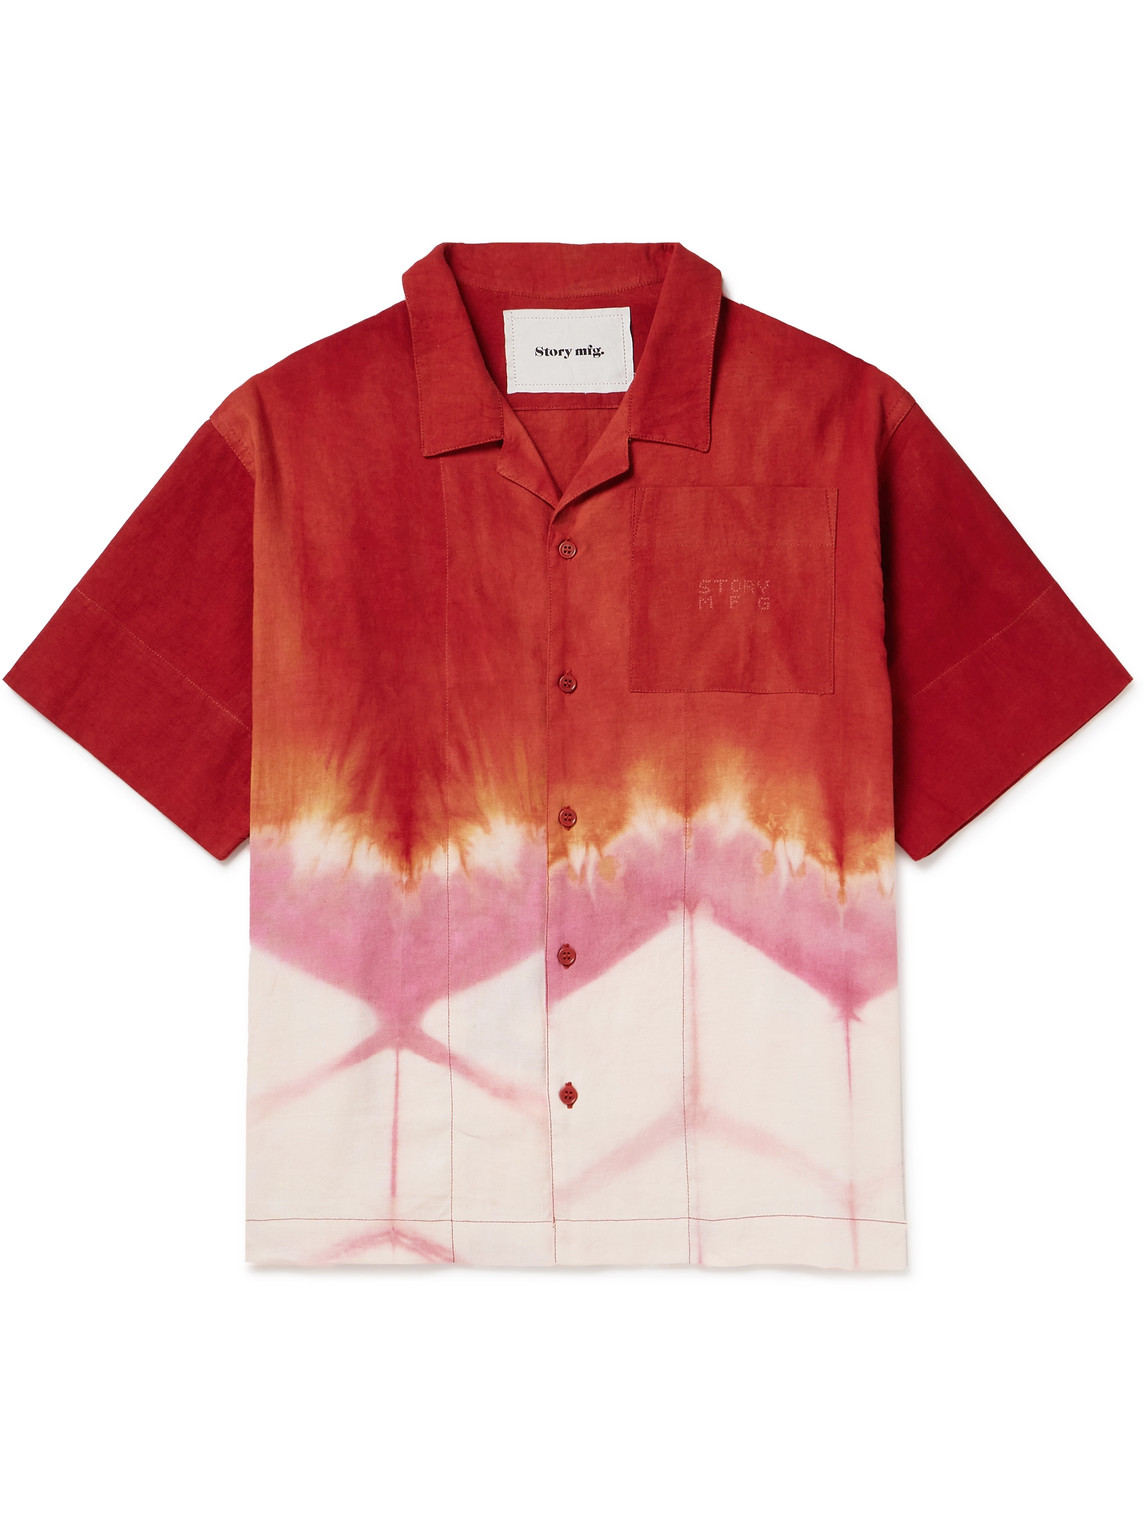 Story Mfg. Greetings Camp-collar Tie-dyed Cotton And Linen-blend Shirt In Red